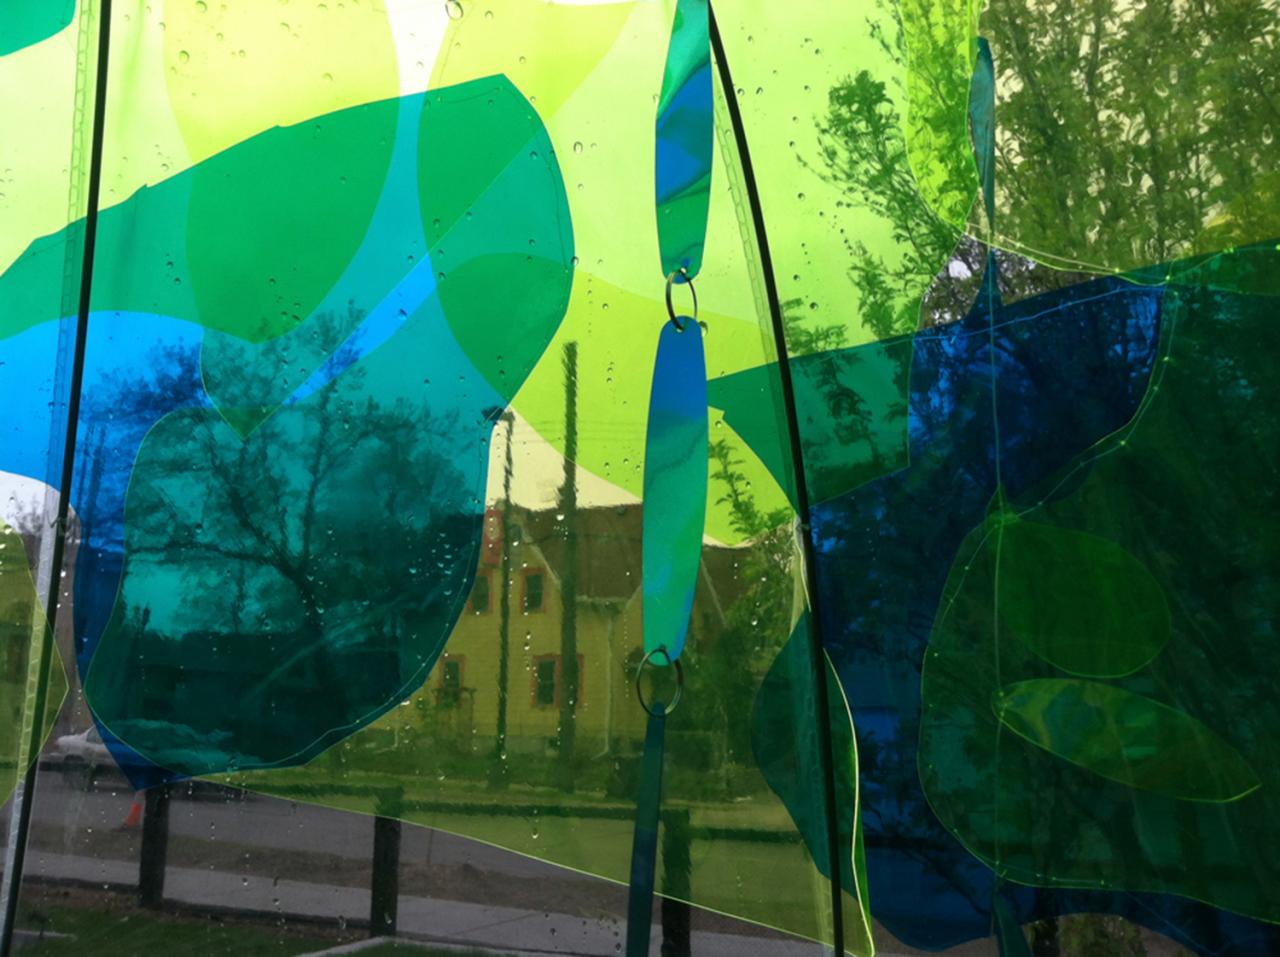 Public sculpture featuring sheets of blue and green, catching light. 